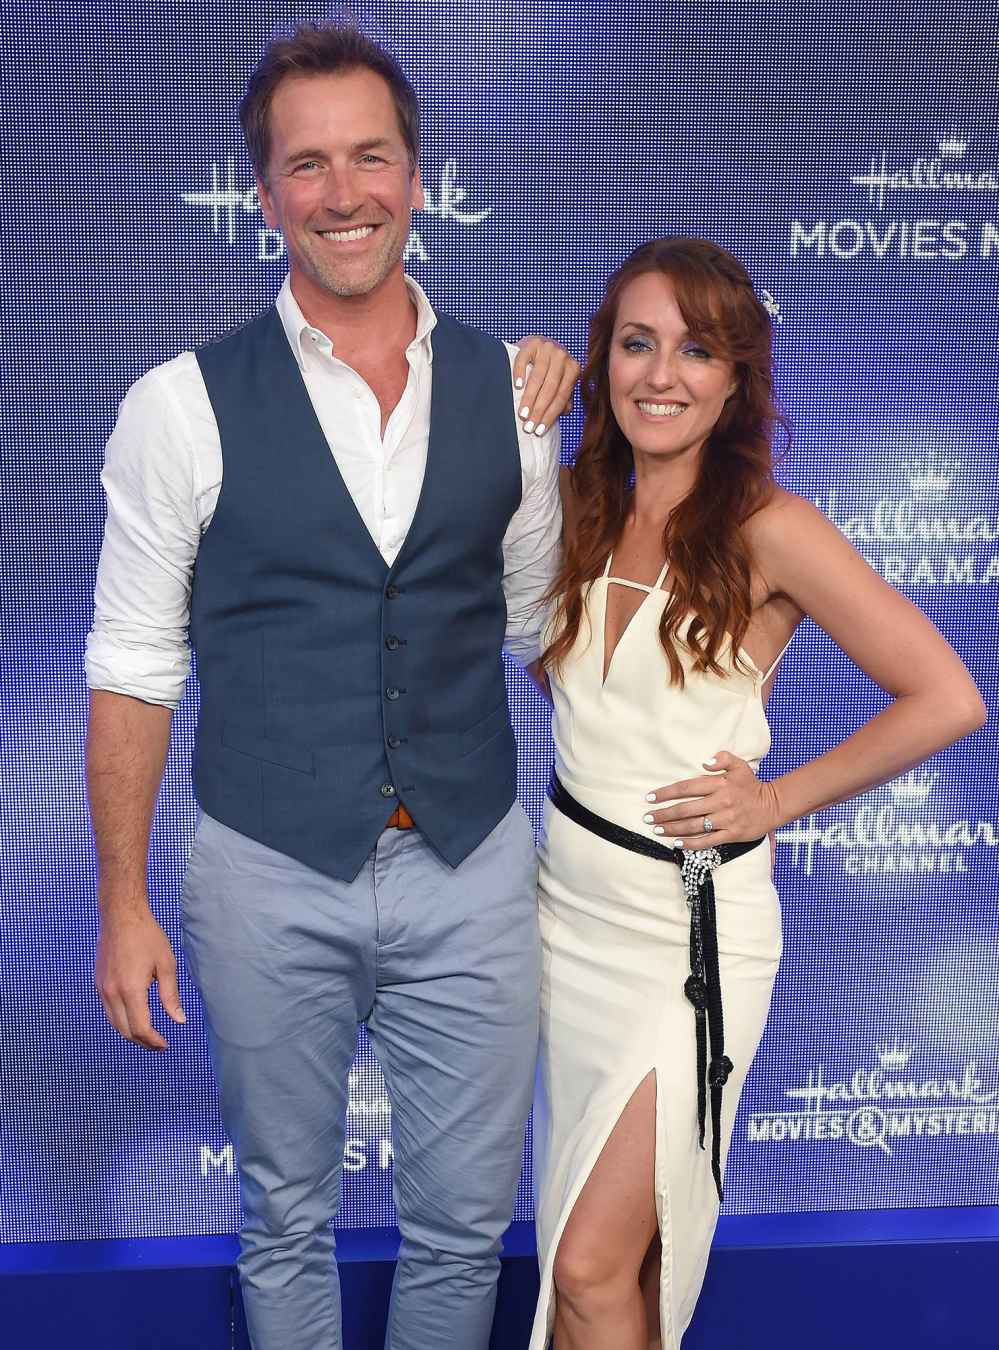 Hallmark Star Paul Greene Welcomes His 2nd Child, His 1st With Fiancee Kate Austin